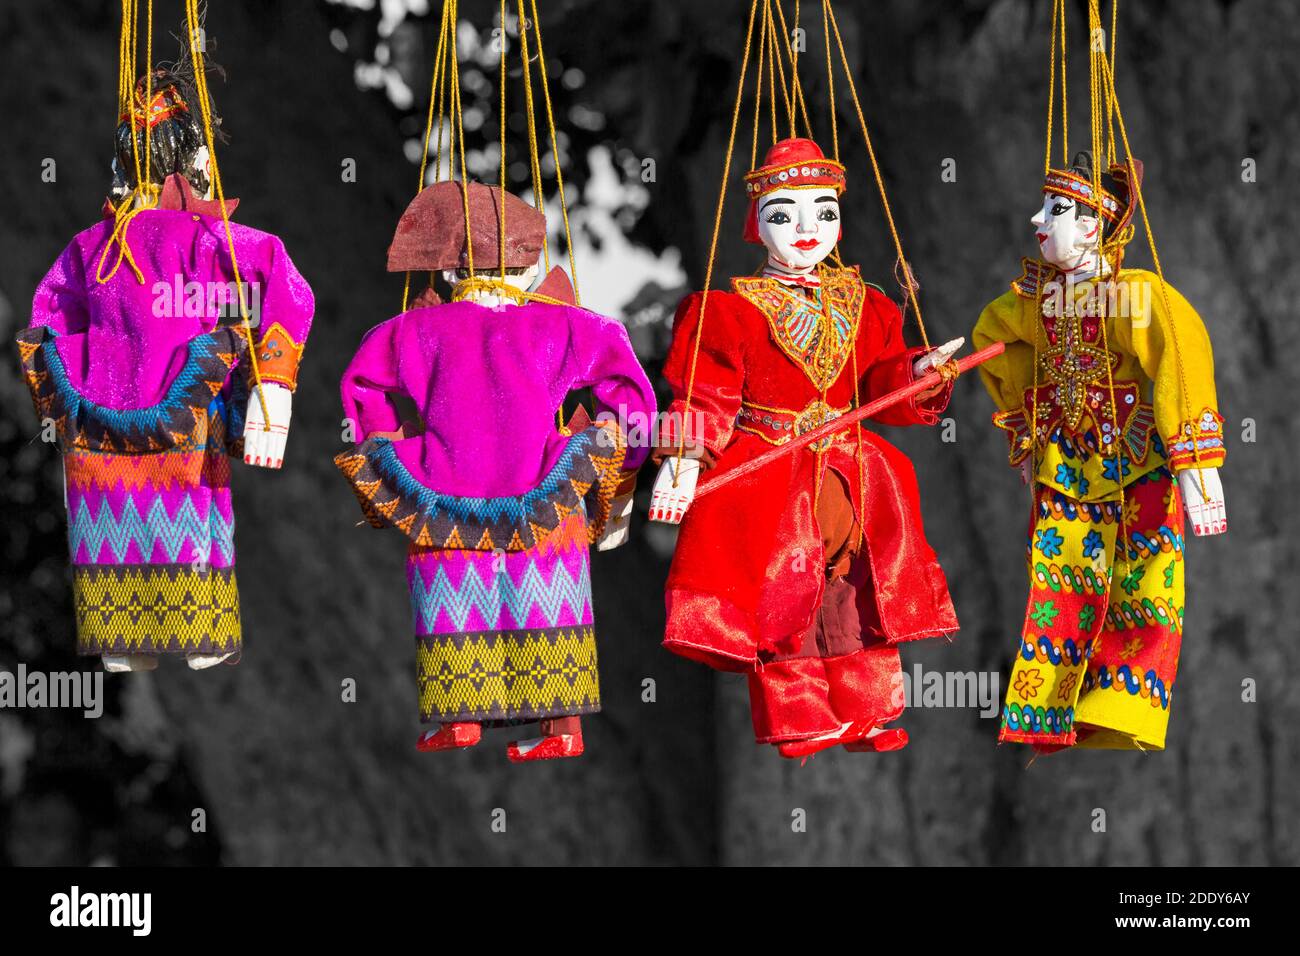 hanging string puppets for sale on stall at Bagan, Myanmar (Burma), Asia in February Stock Photo